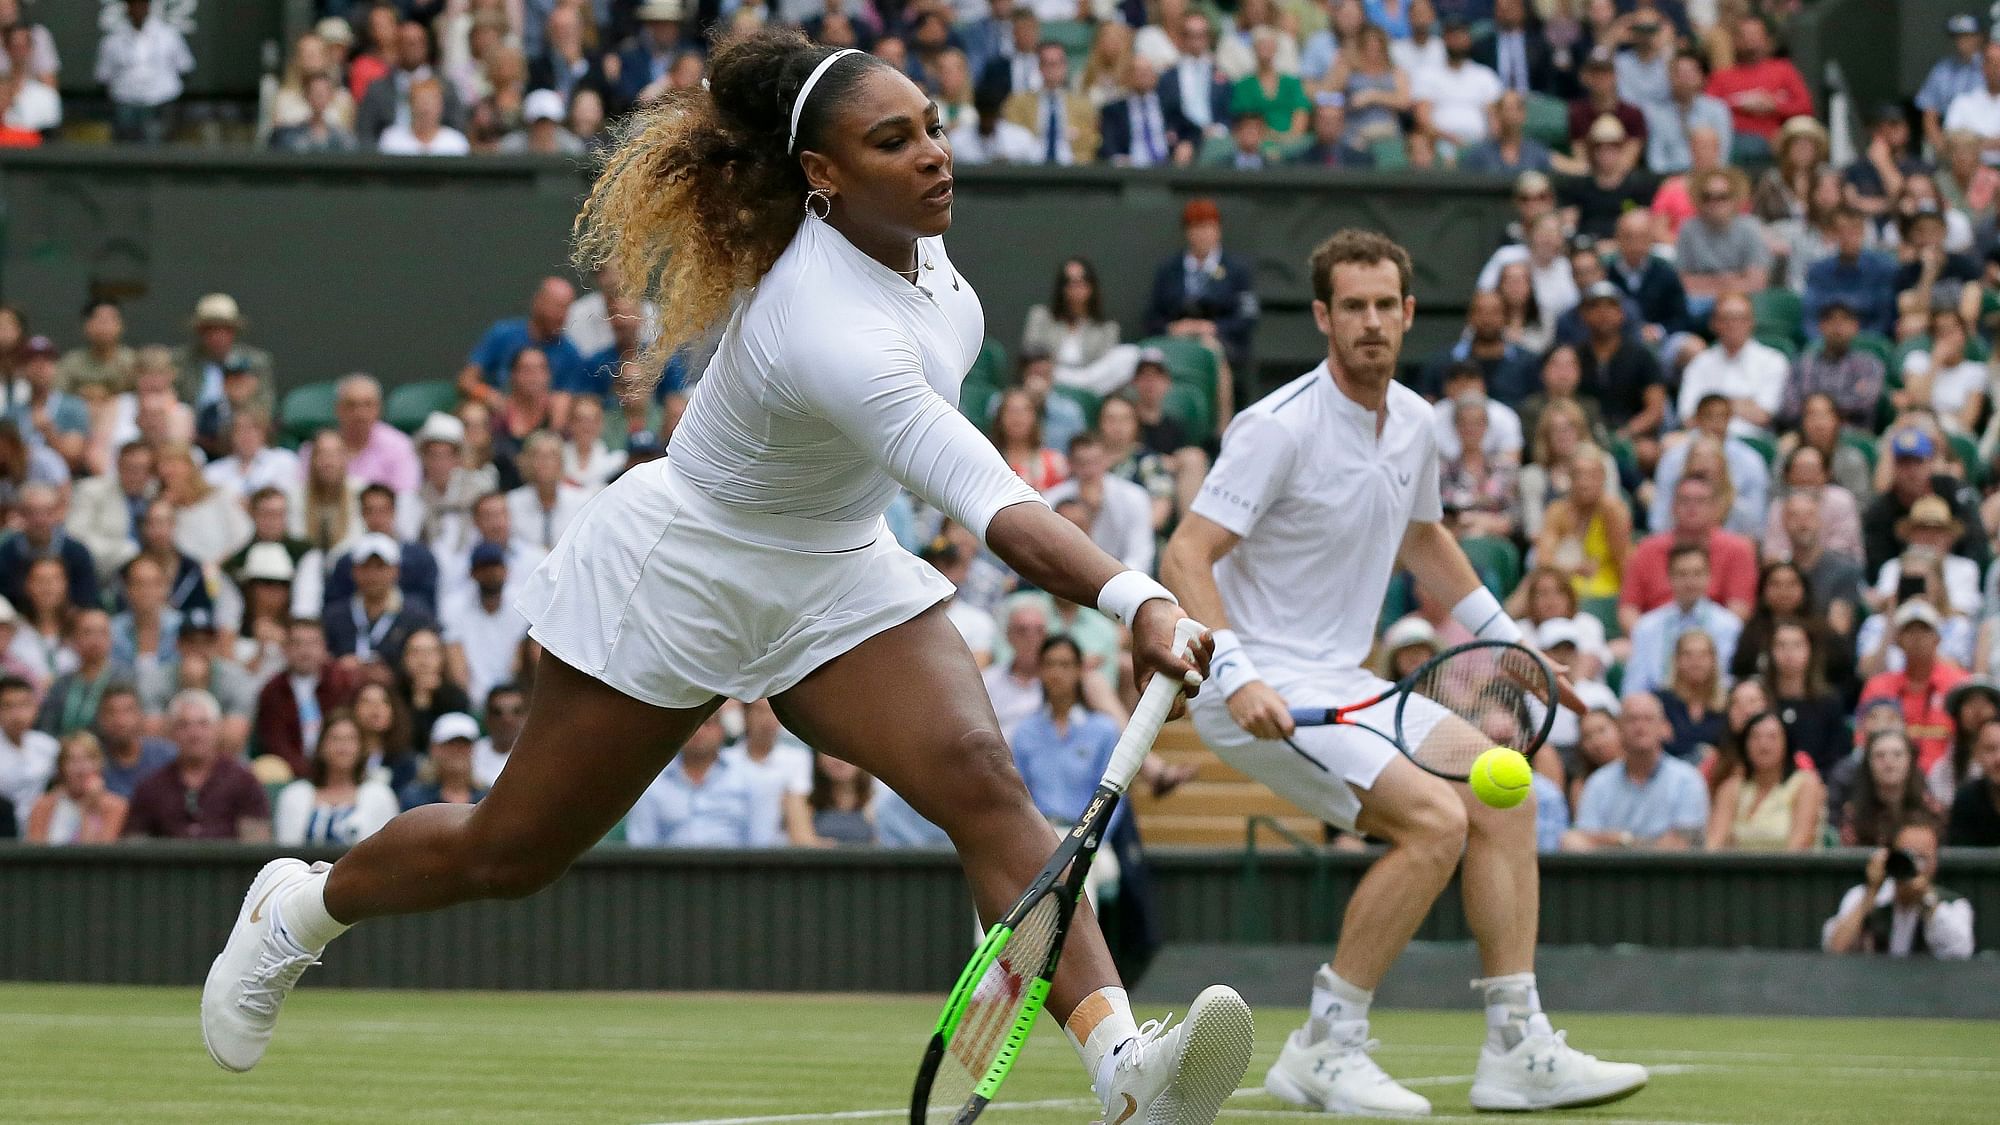 United States’ Serena Williams, left, is watched by playing partner Andy Murray as she plays a shot during a mixed doubles match at Wimbledon.